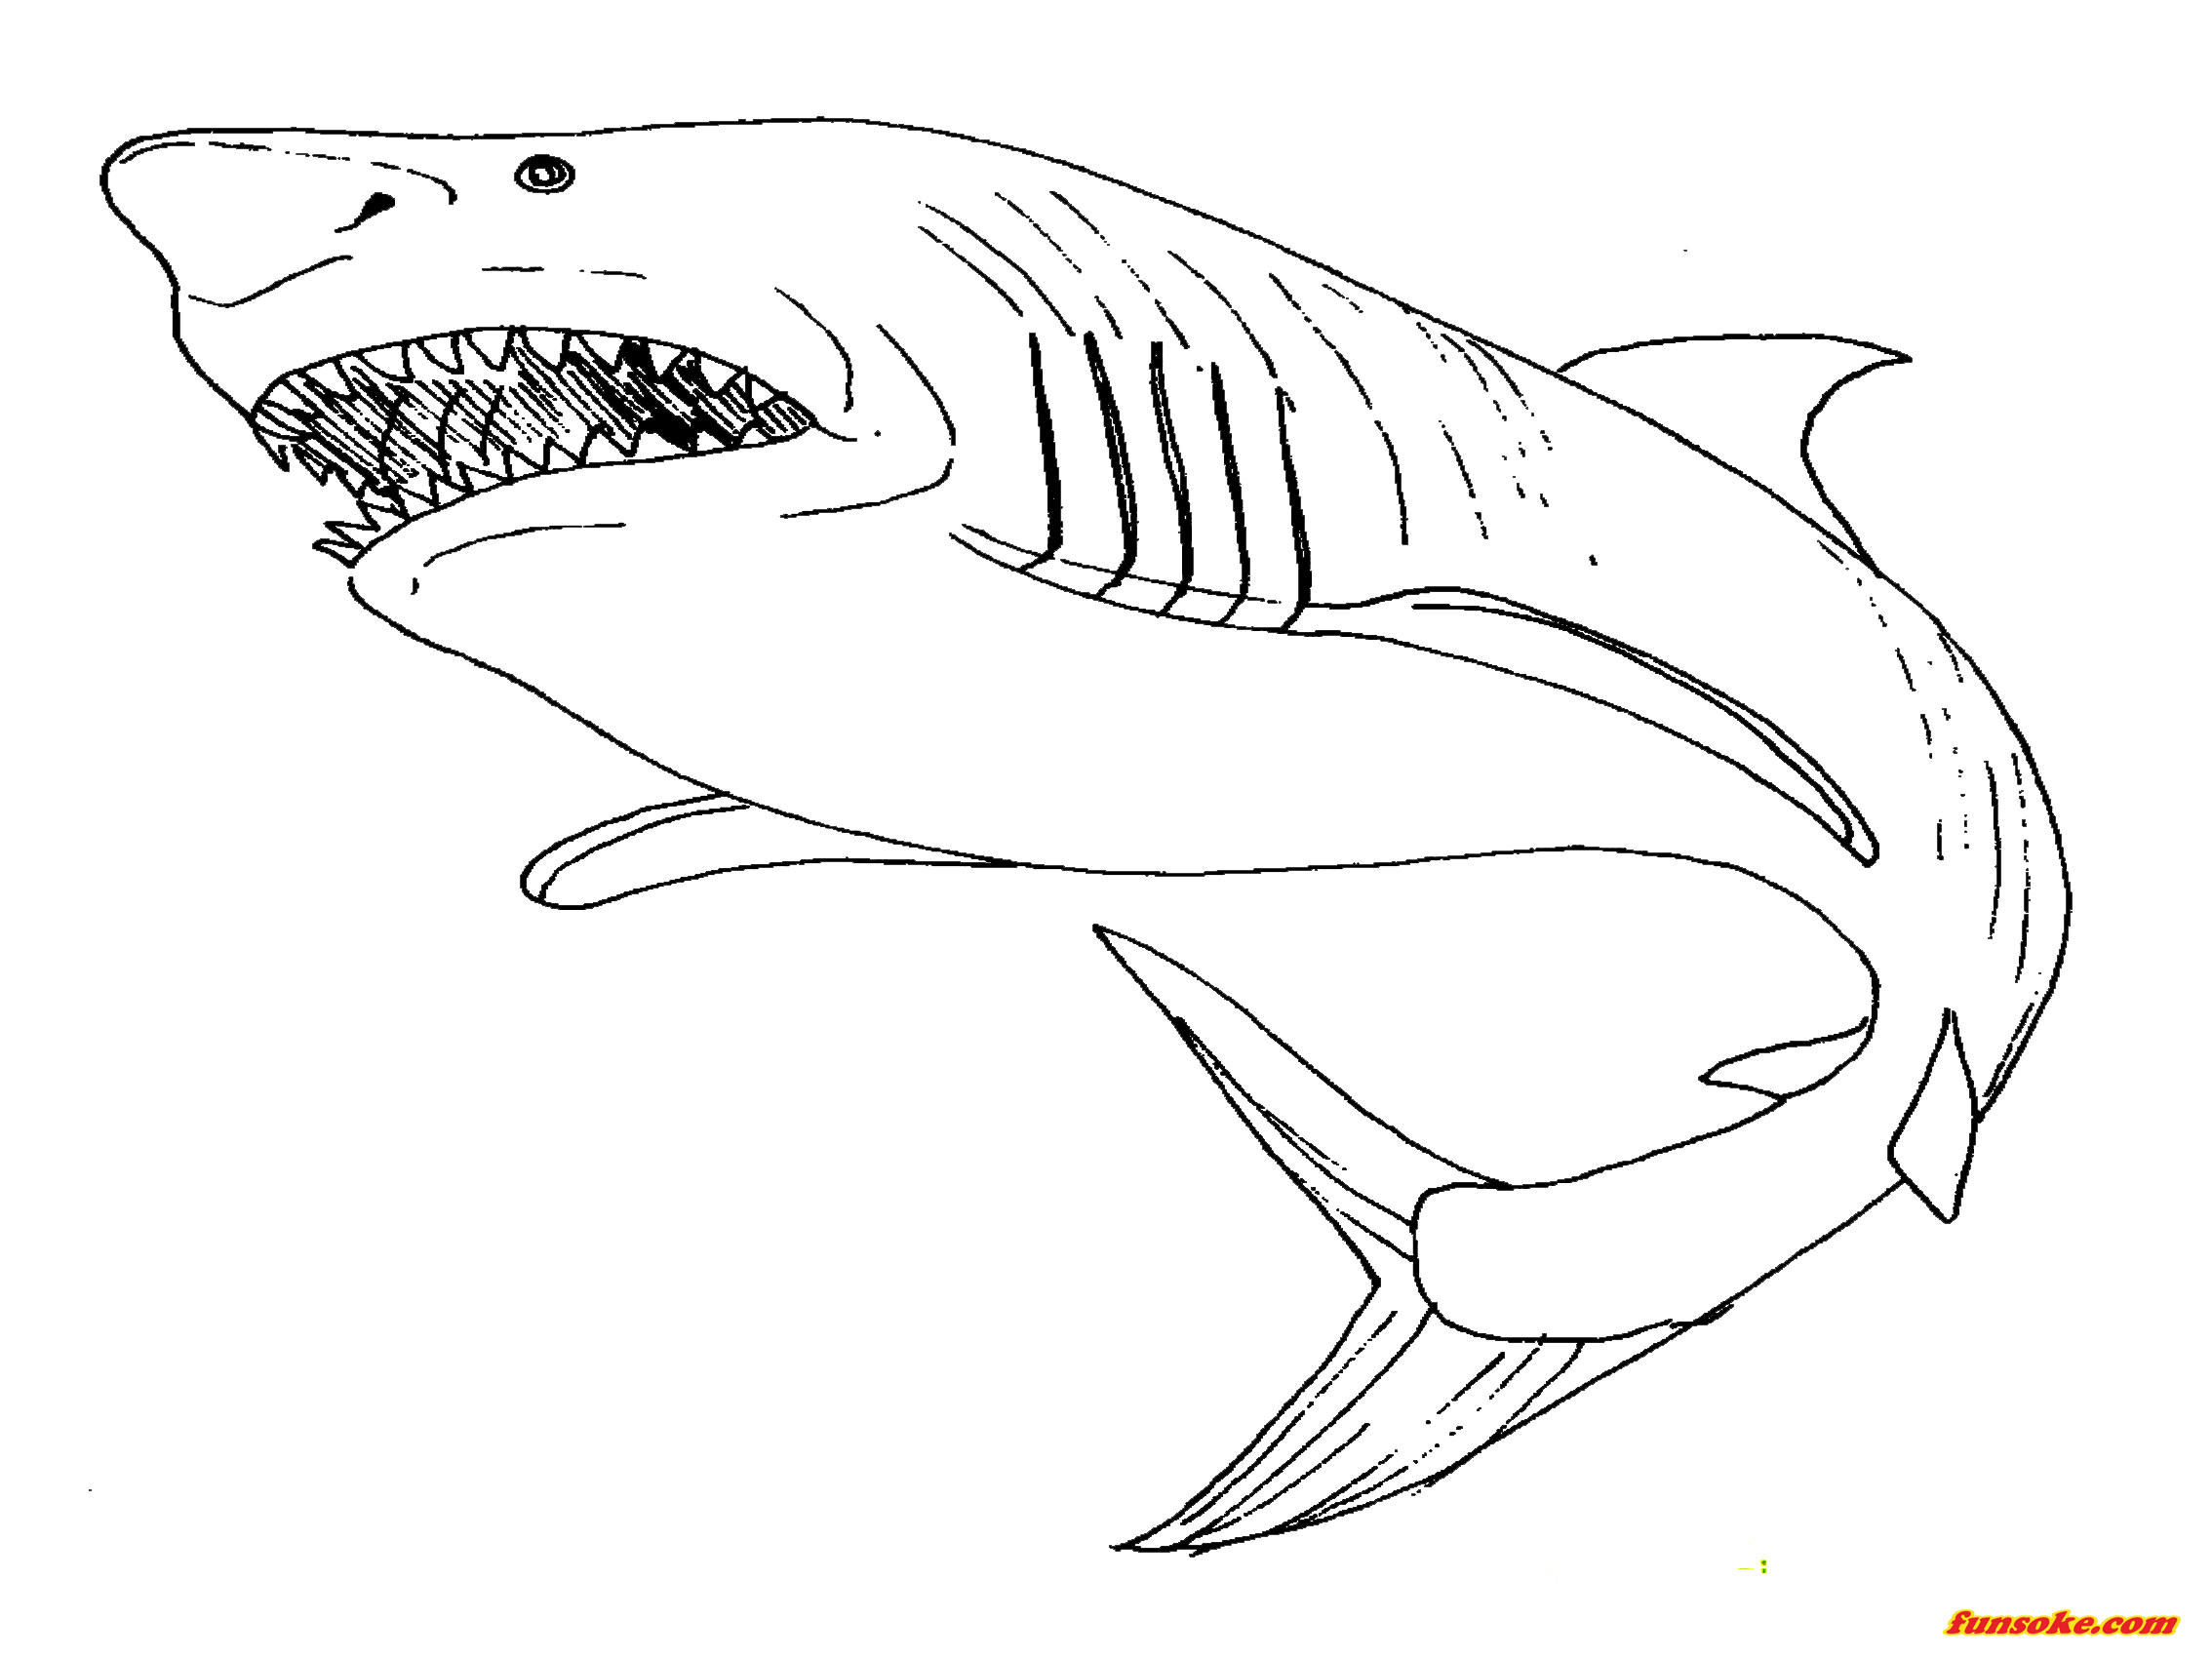 Megalodon coloring pages to print - Funsoke